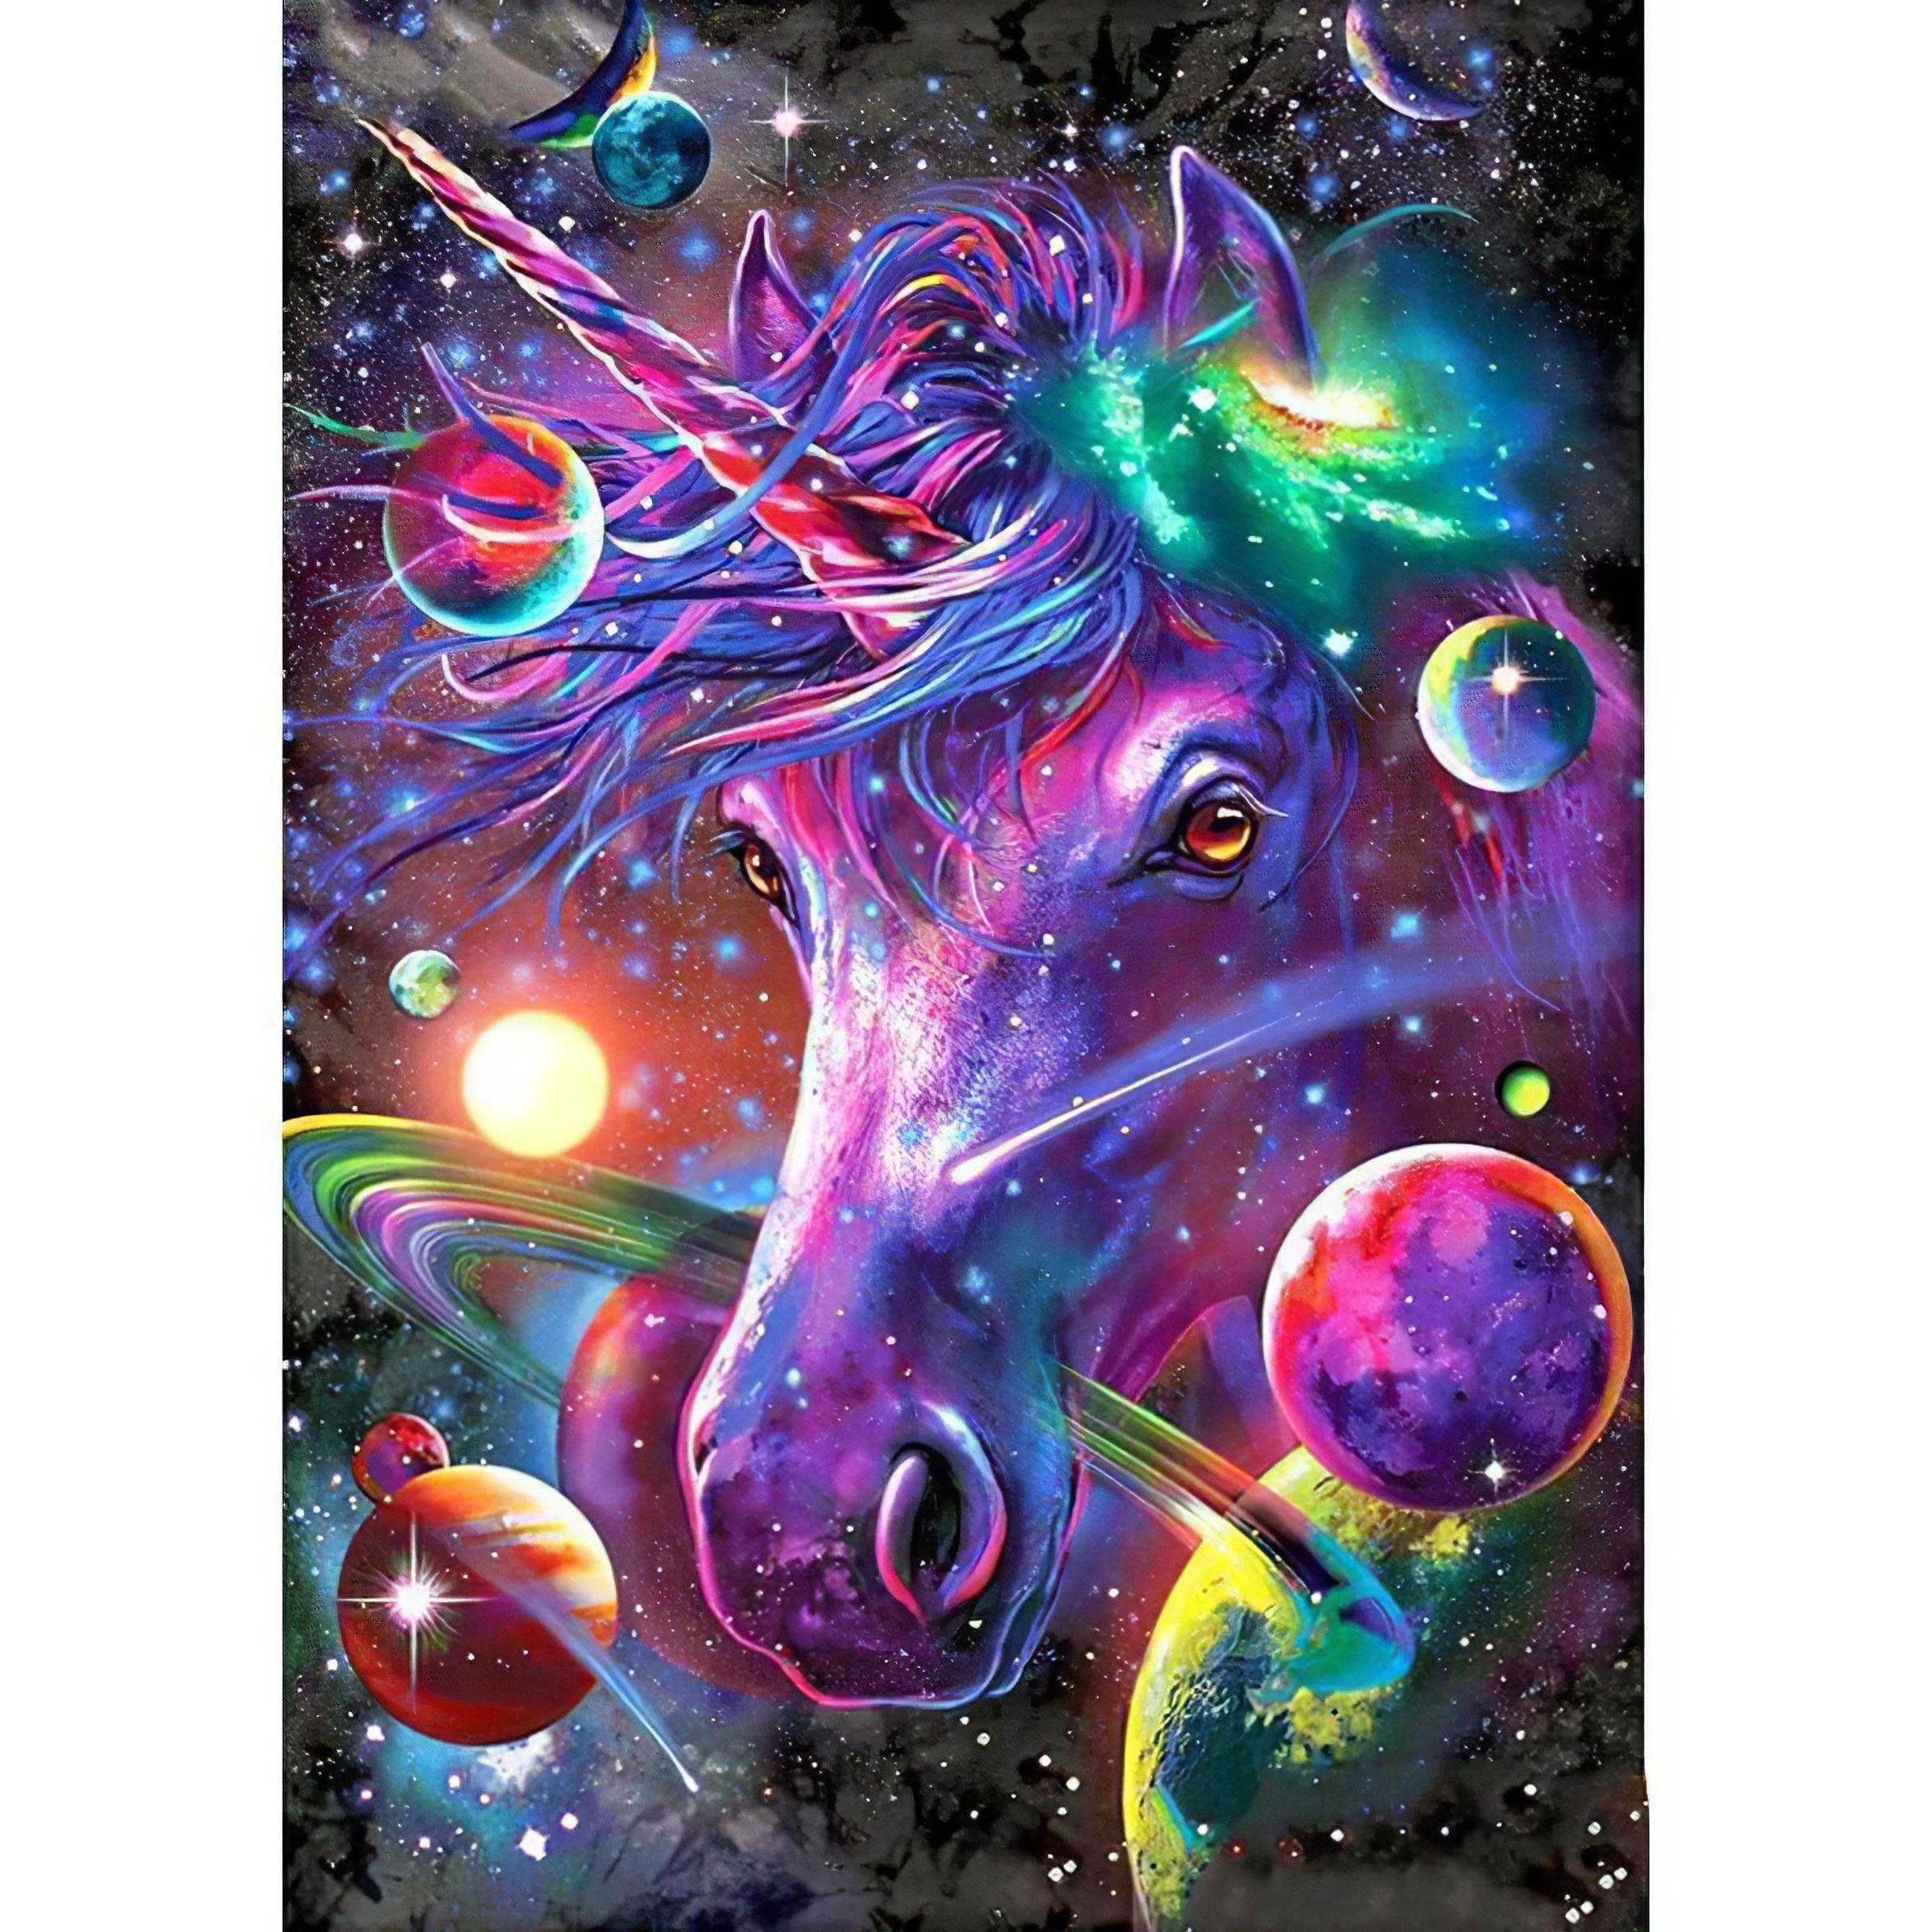 Step into a fantasy with a colored unicorn, where magic and colors blend.Colored Unicorn - Diamondartlove